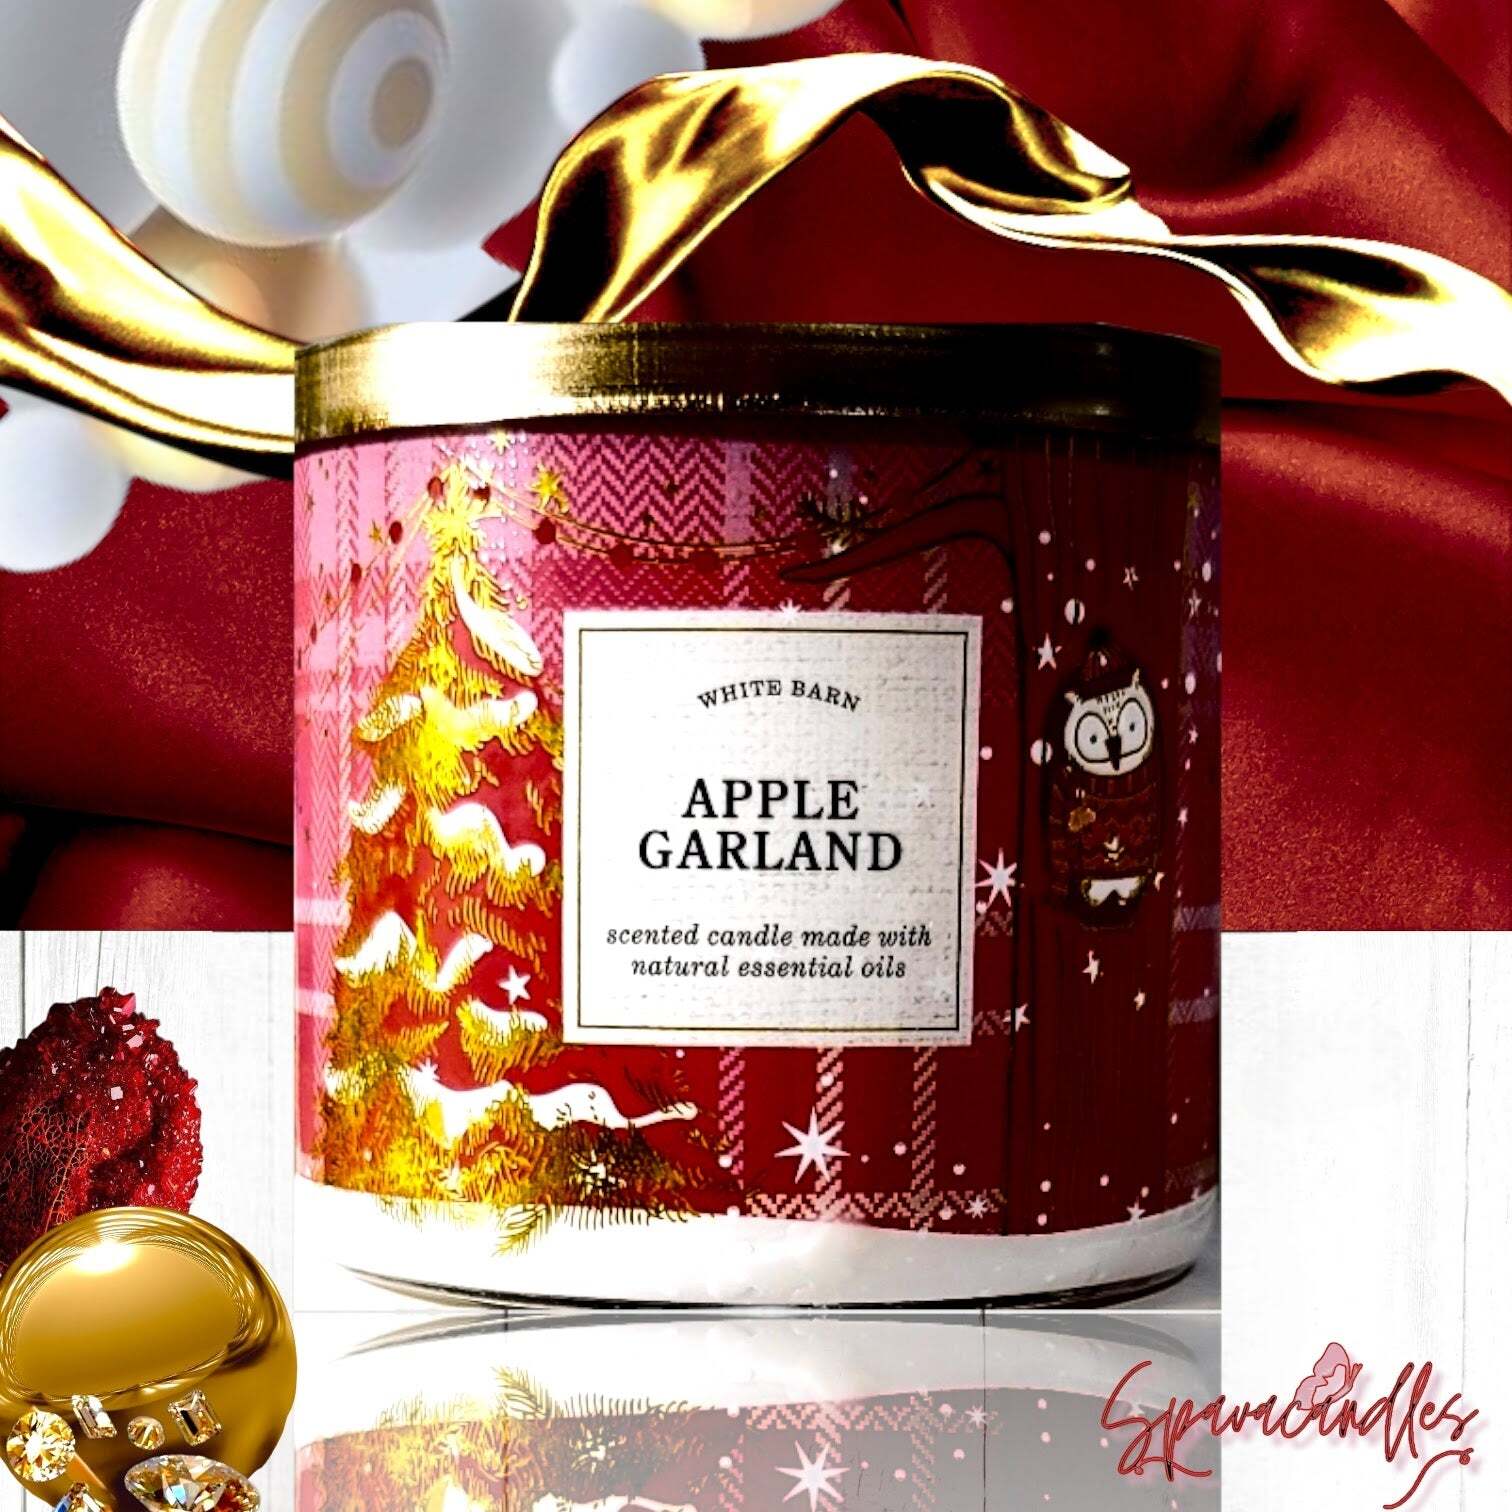 Apple Garland 3 Wick Candle